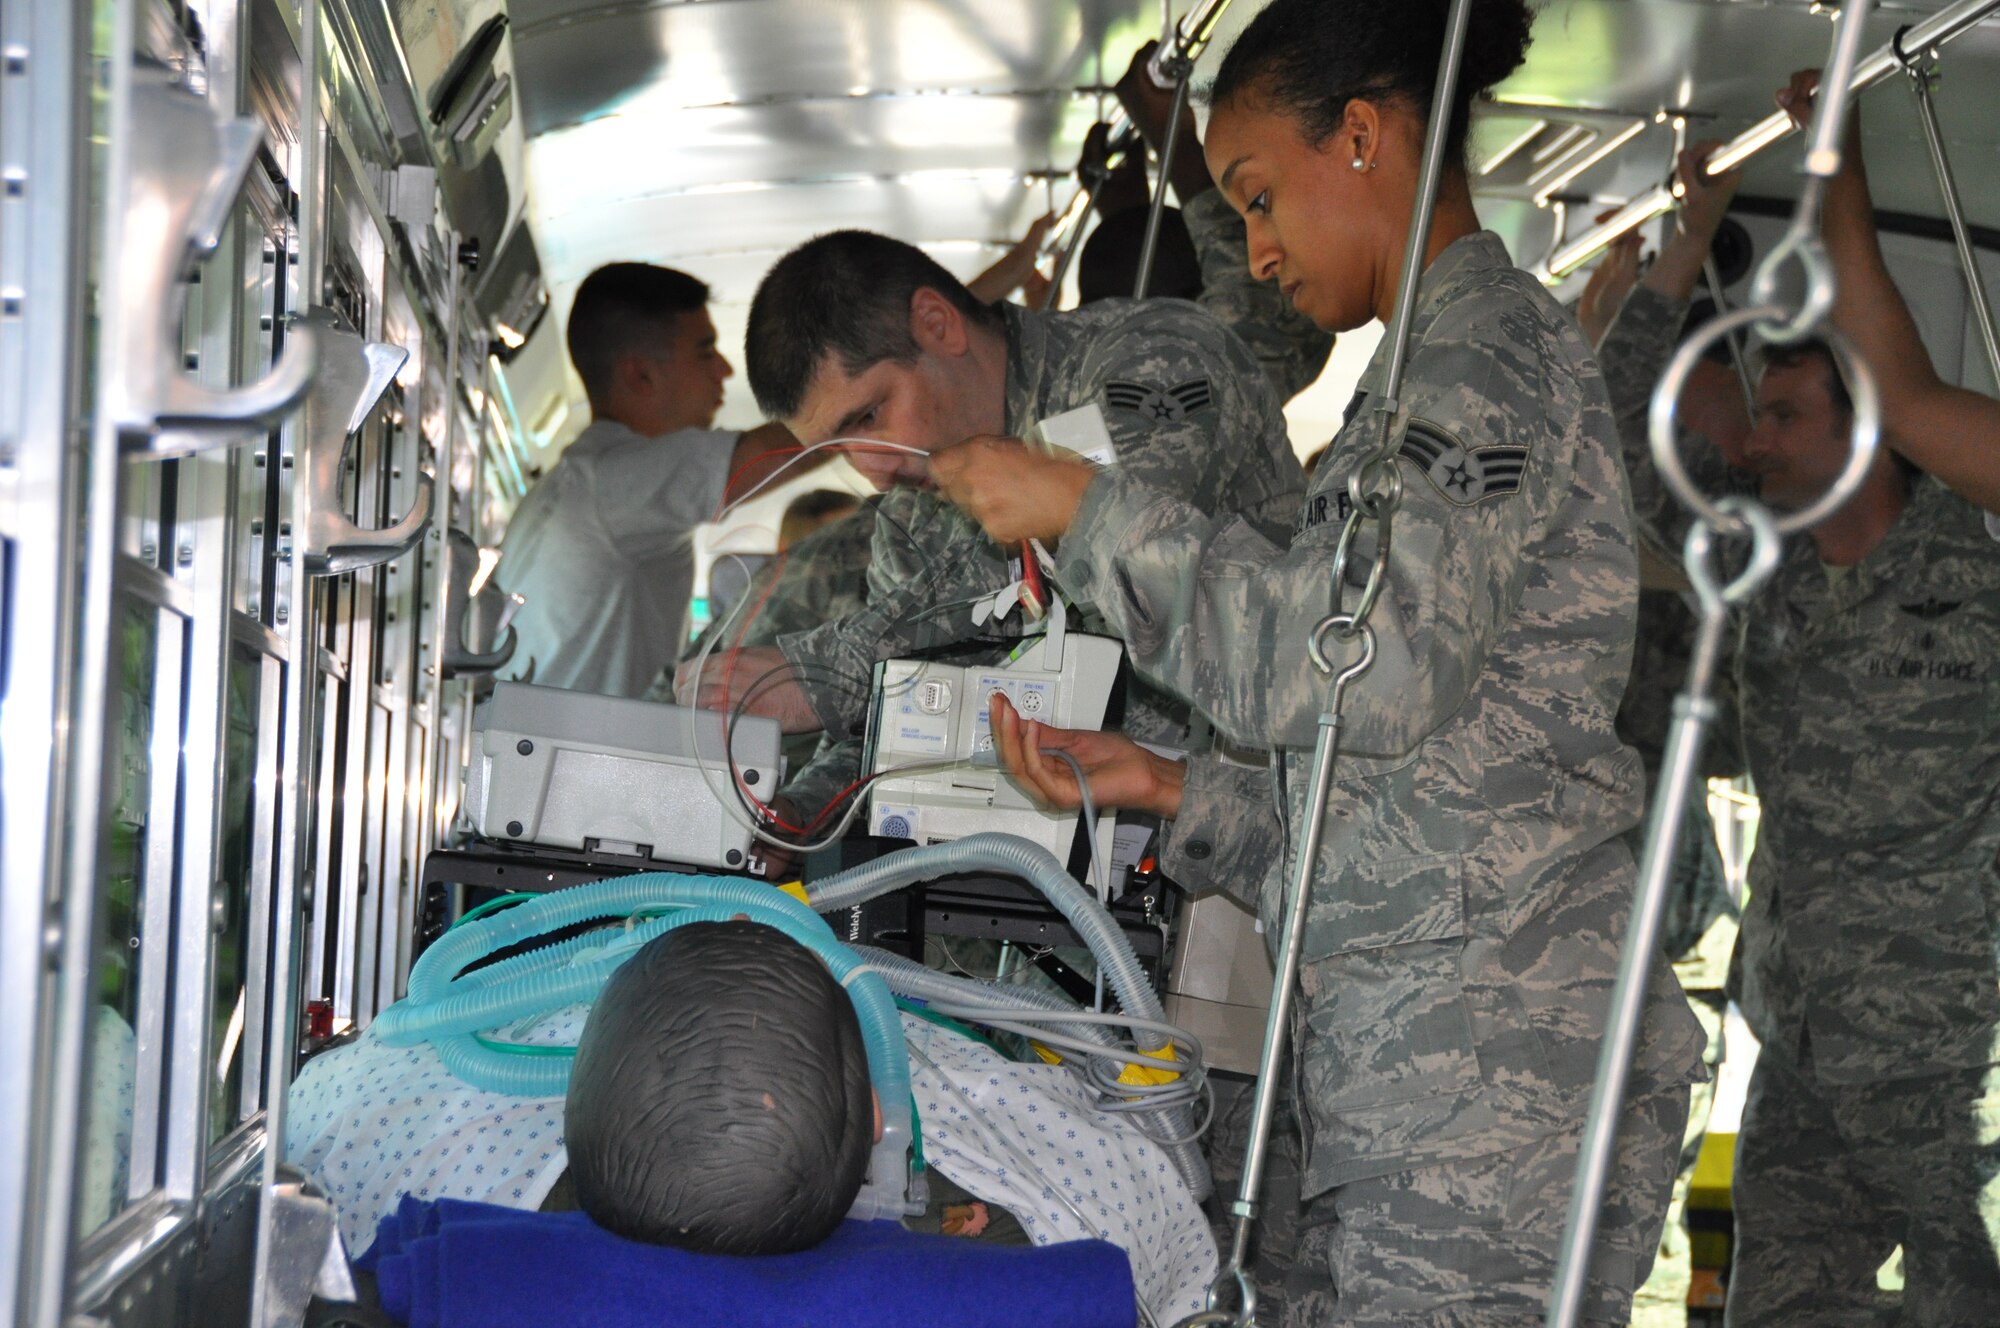 Senior Airman Gabriel Sandu and Senior Airman Jasmine Simms, both cardiopulmonary lab specialists, work diligently to insure a critical condition patient receives the proper medical attention on transit to the aerial evacuation. The exercise mimicked emergency medical situation in the event of a disaster at Joint Base Andrews on Monday, May 4, 2015 (Air Force Photo / Senior Airman Kristin Kurtz)